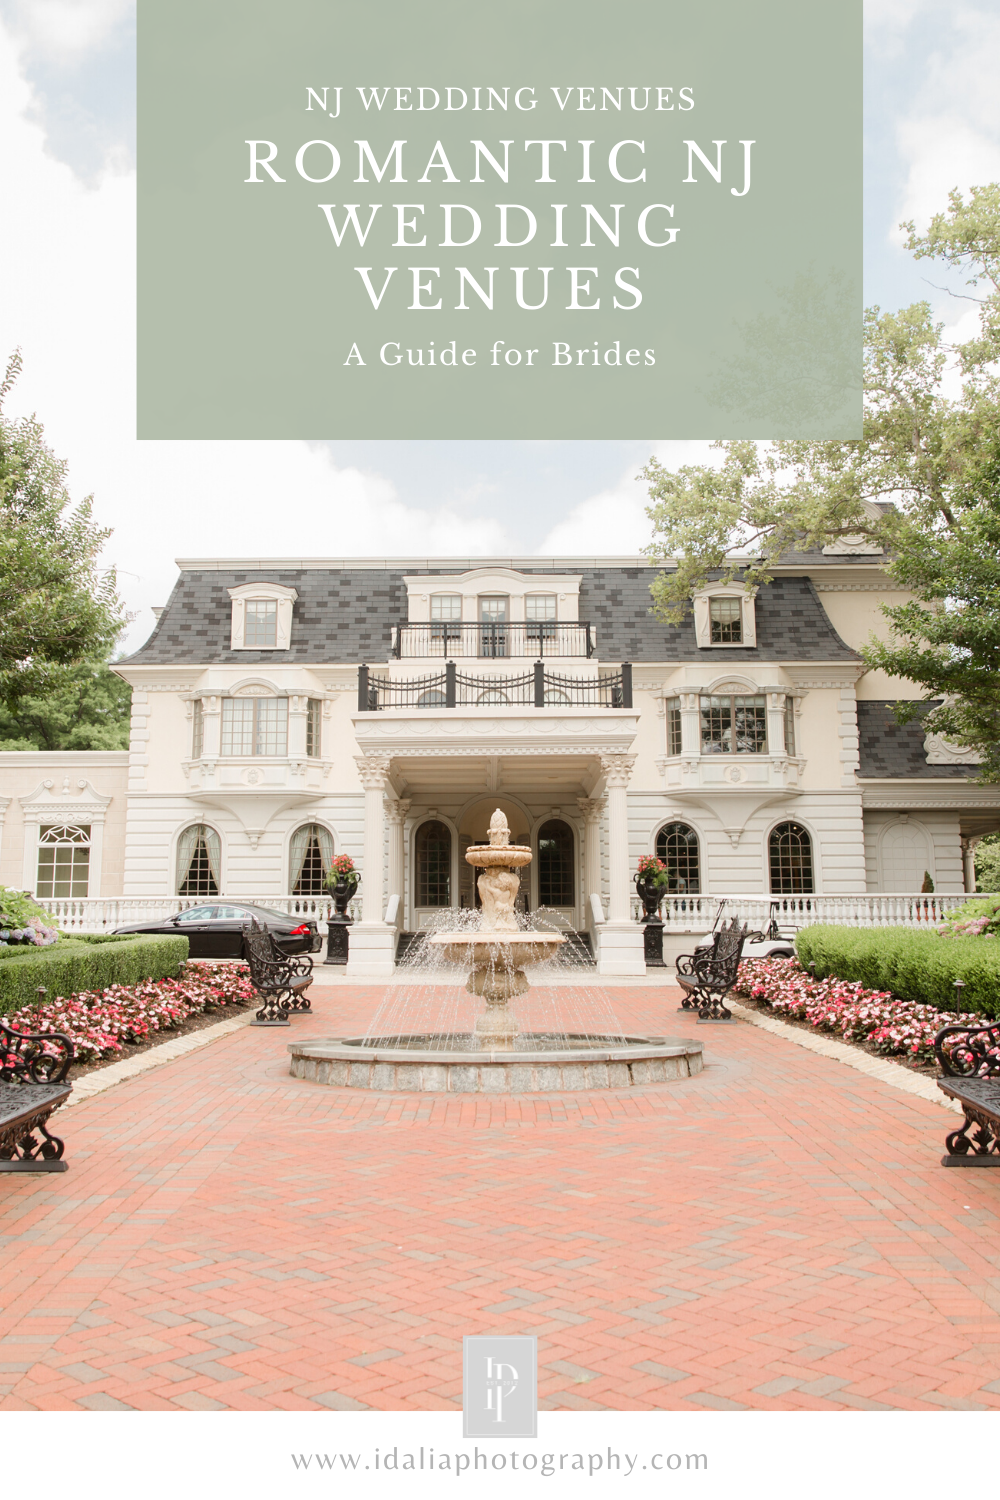 Looking for romantic wedding venues in NJ? Click to view our favorite venues for classic and timeless weddings.